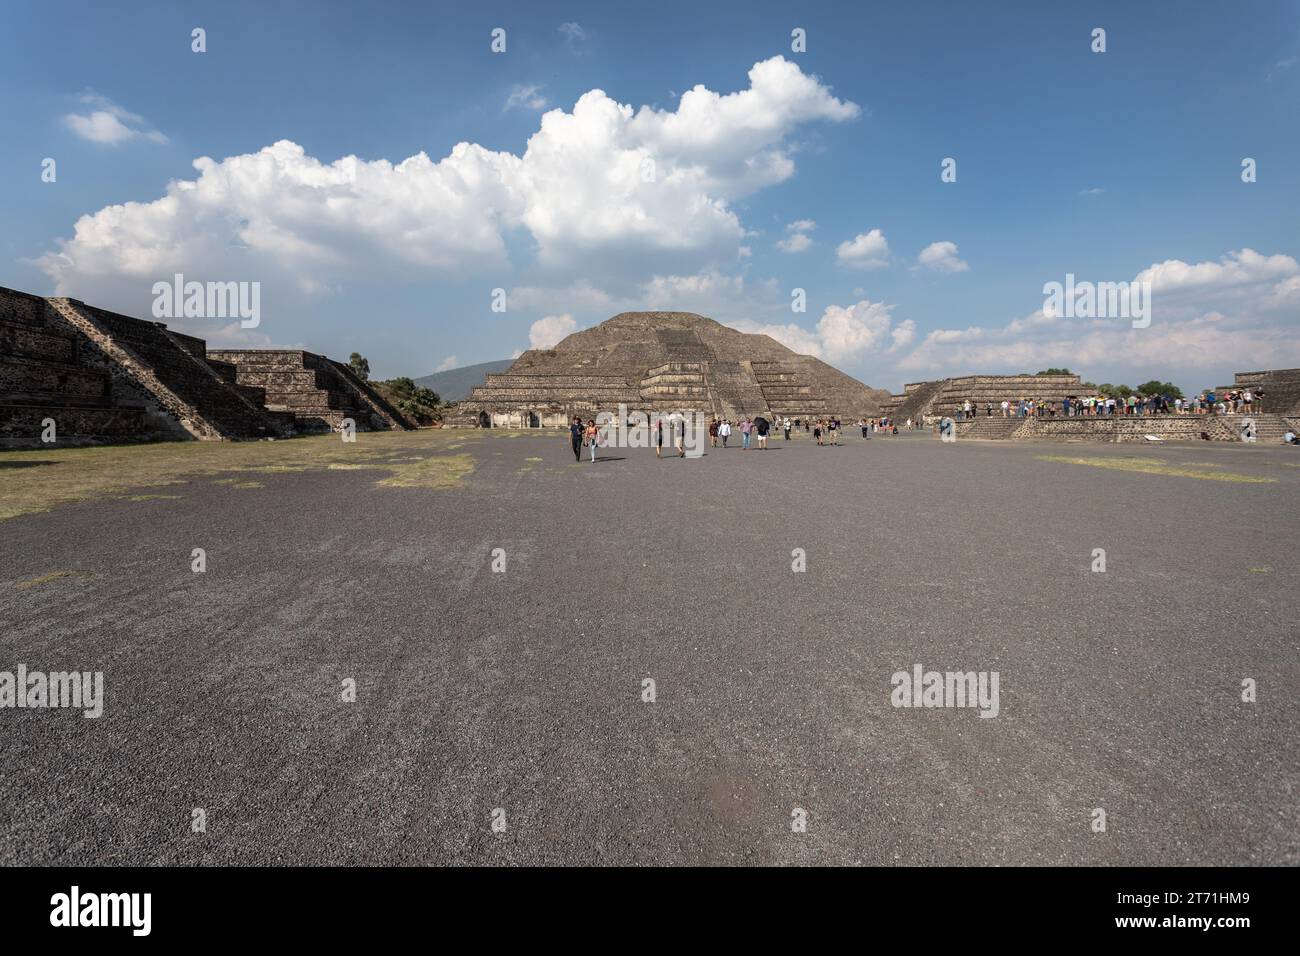 A group of people standing in front of the Pyramid of the Sun in Teotihuacan, Mexico Stock Photo